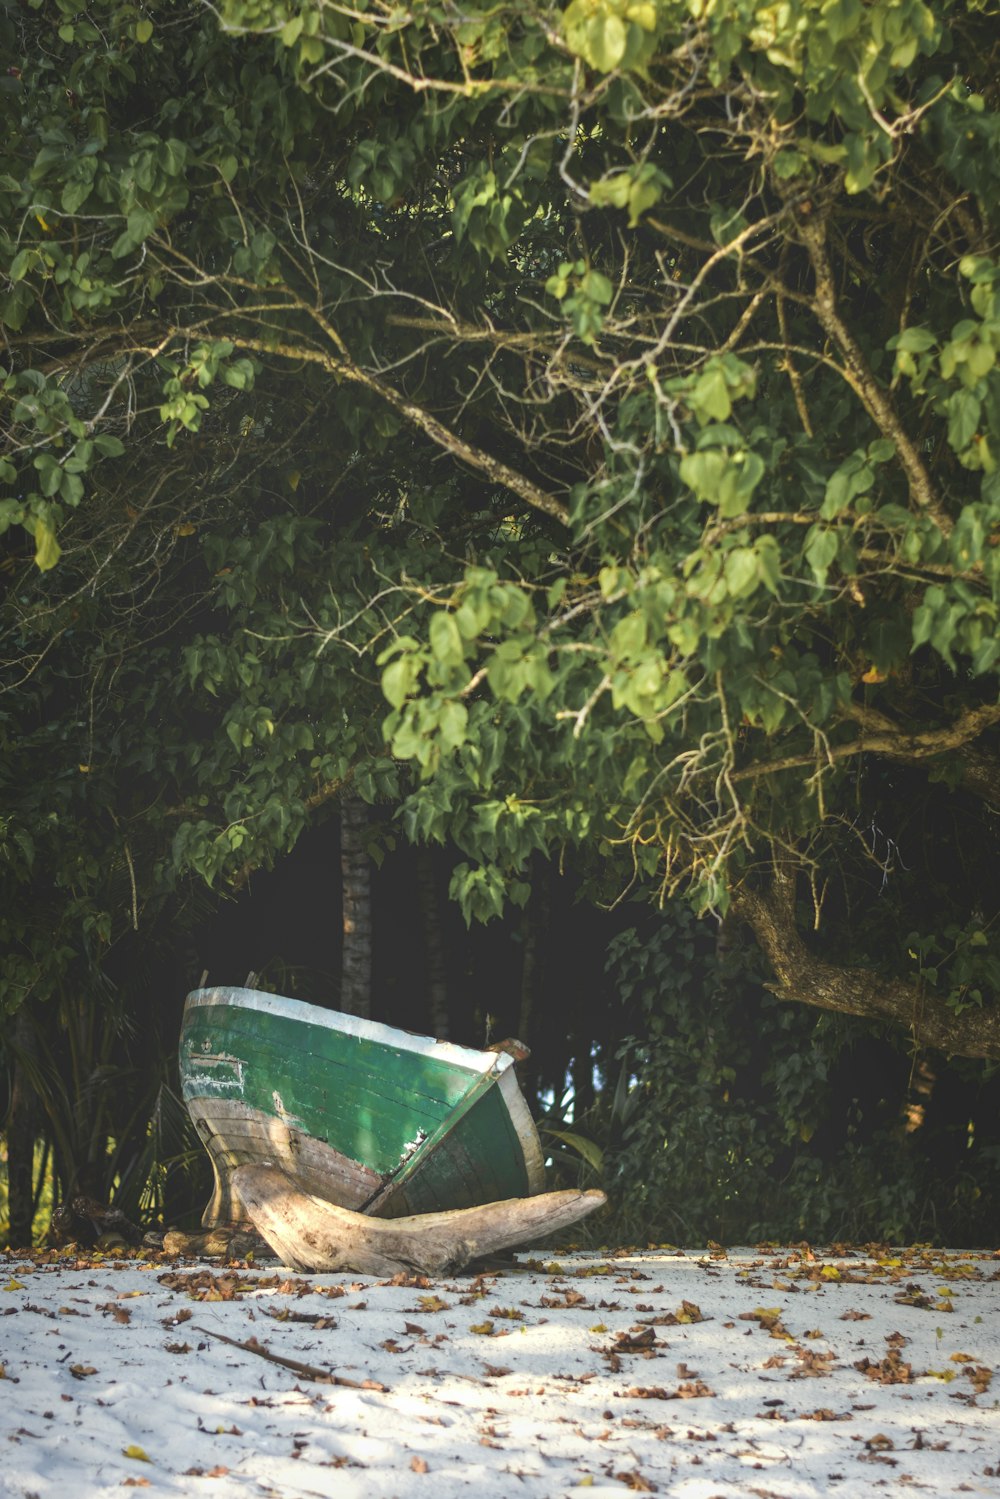 green and white canoe on body of water